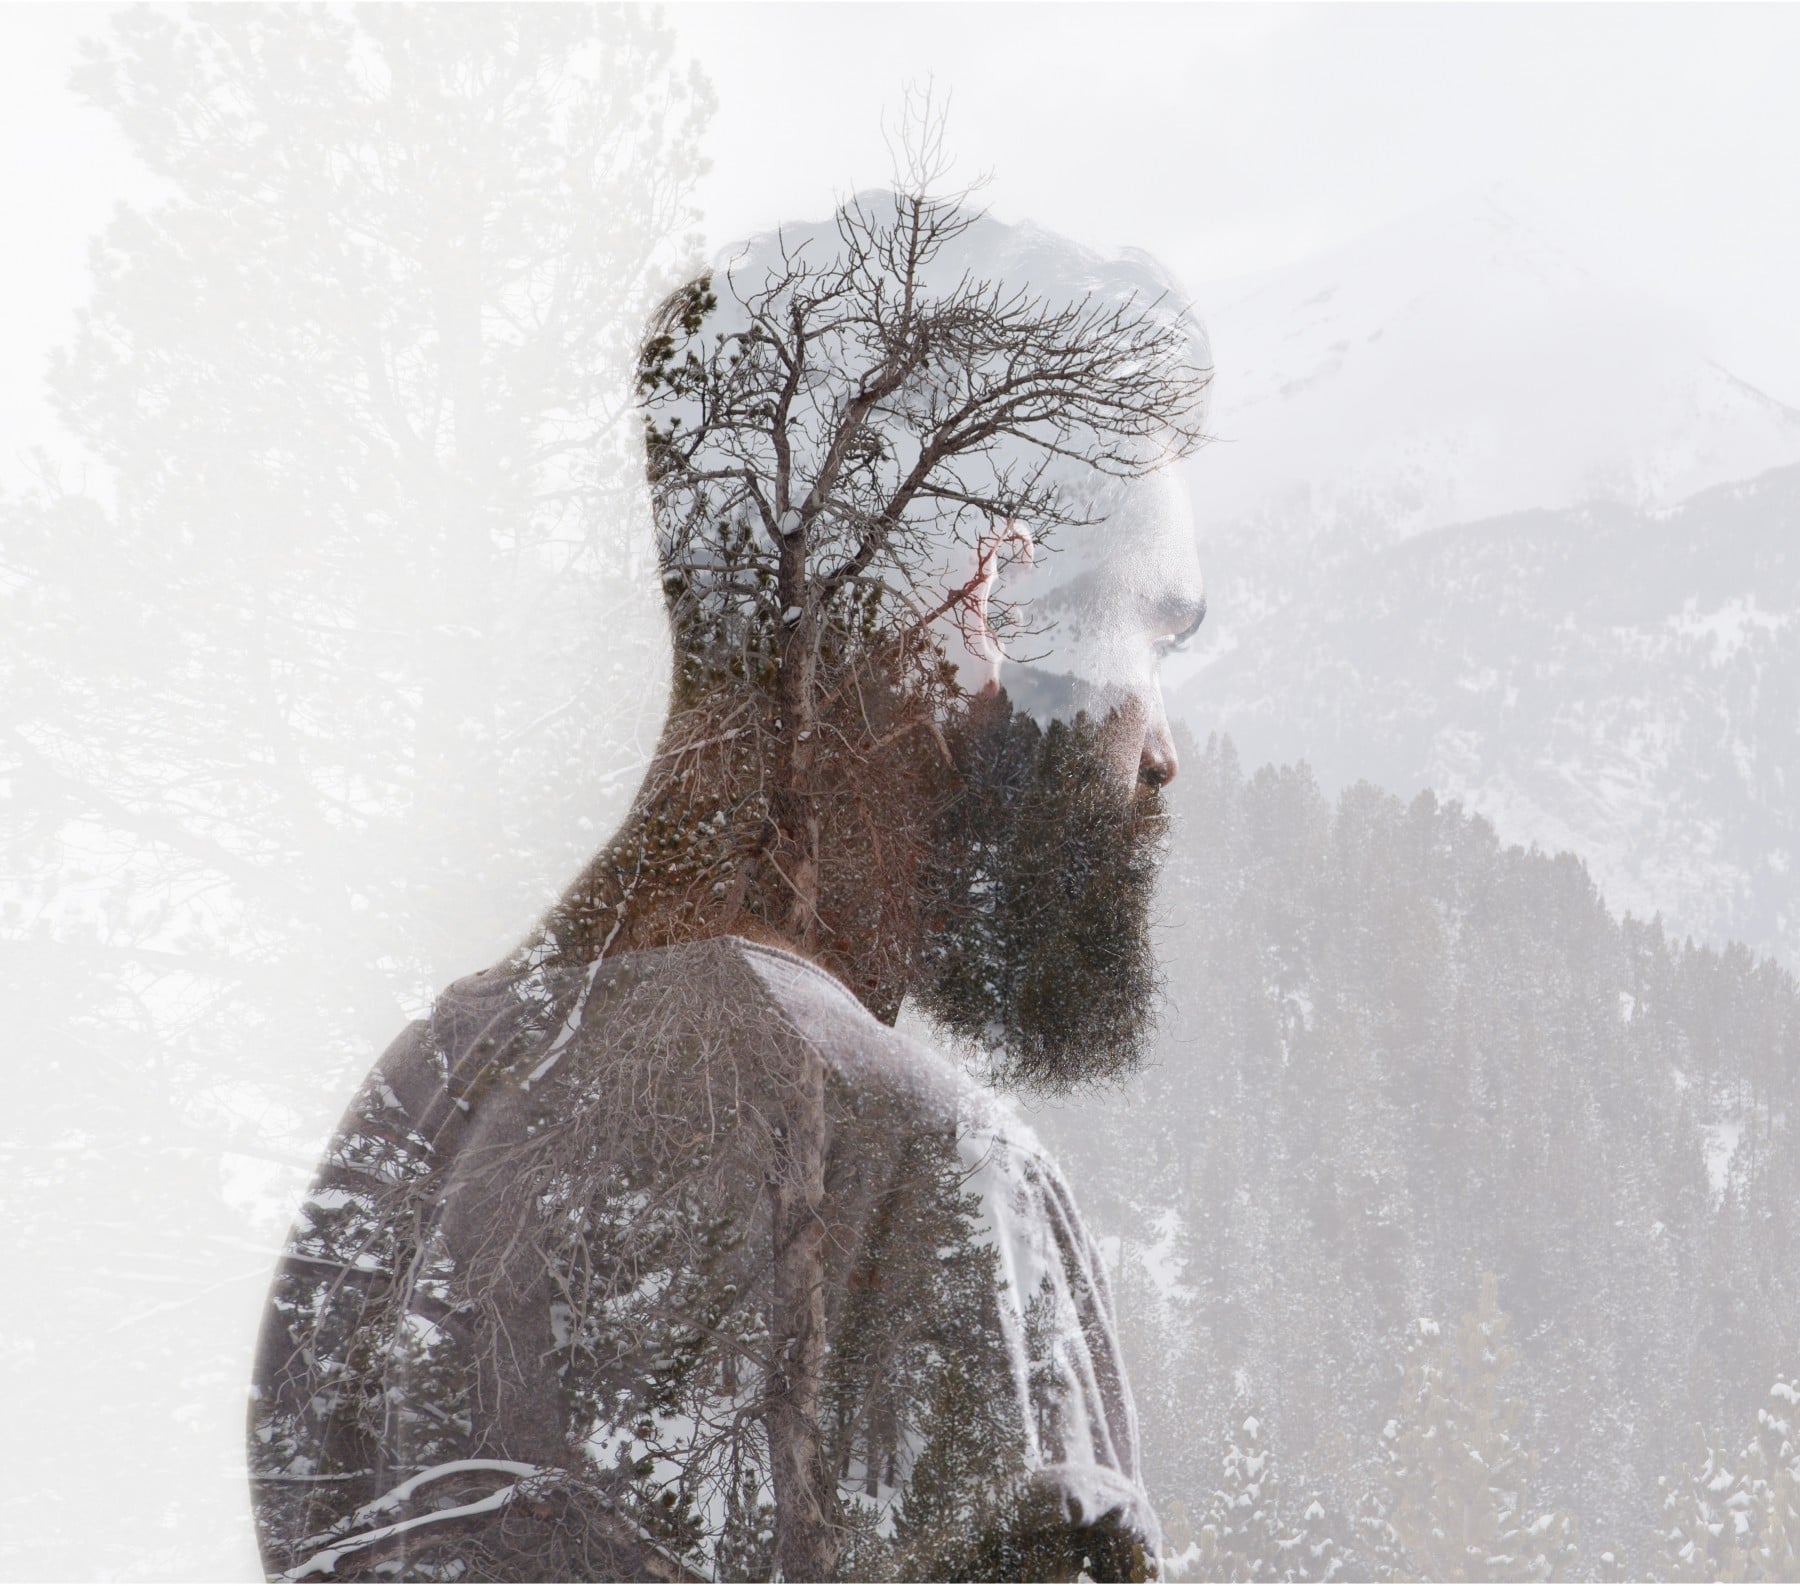 Double color exposure portrait of a bearded guy and tree